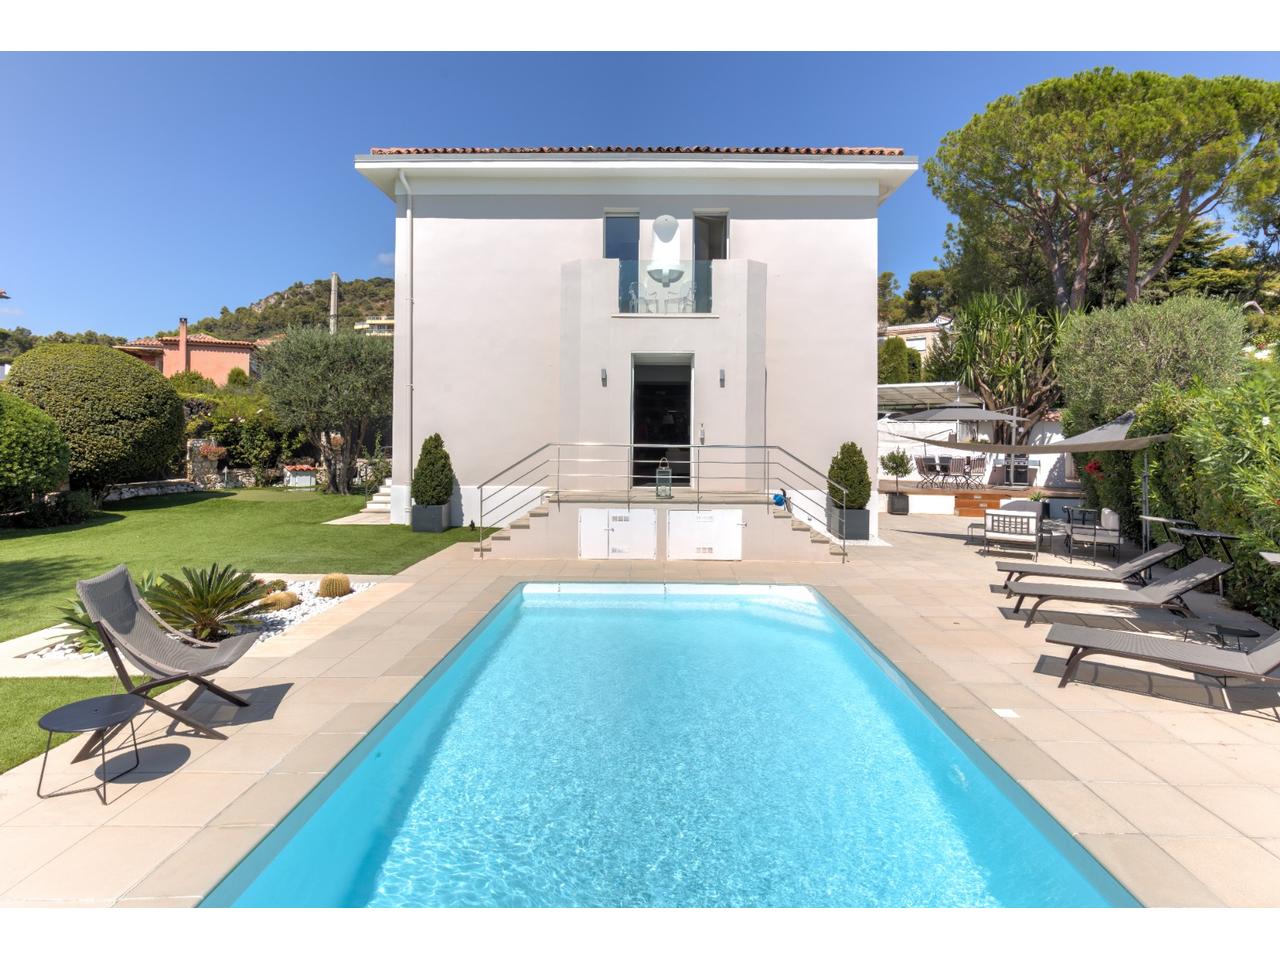 Nice Riviera - Agence Immobiliére Nice Côte d'Azur | House 6 Rooms 200m2 for sale 2,750,000 €